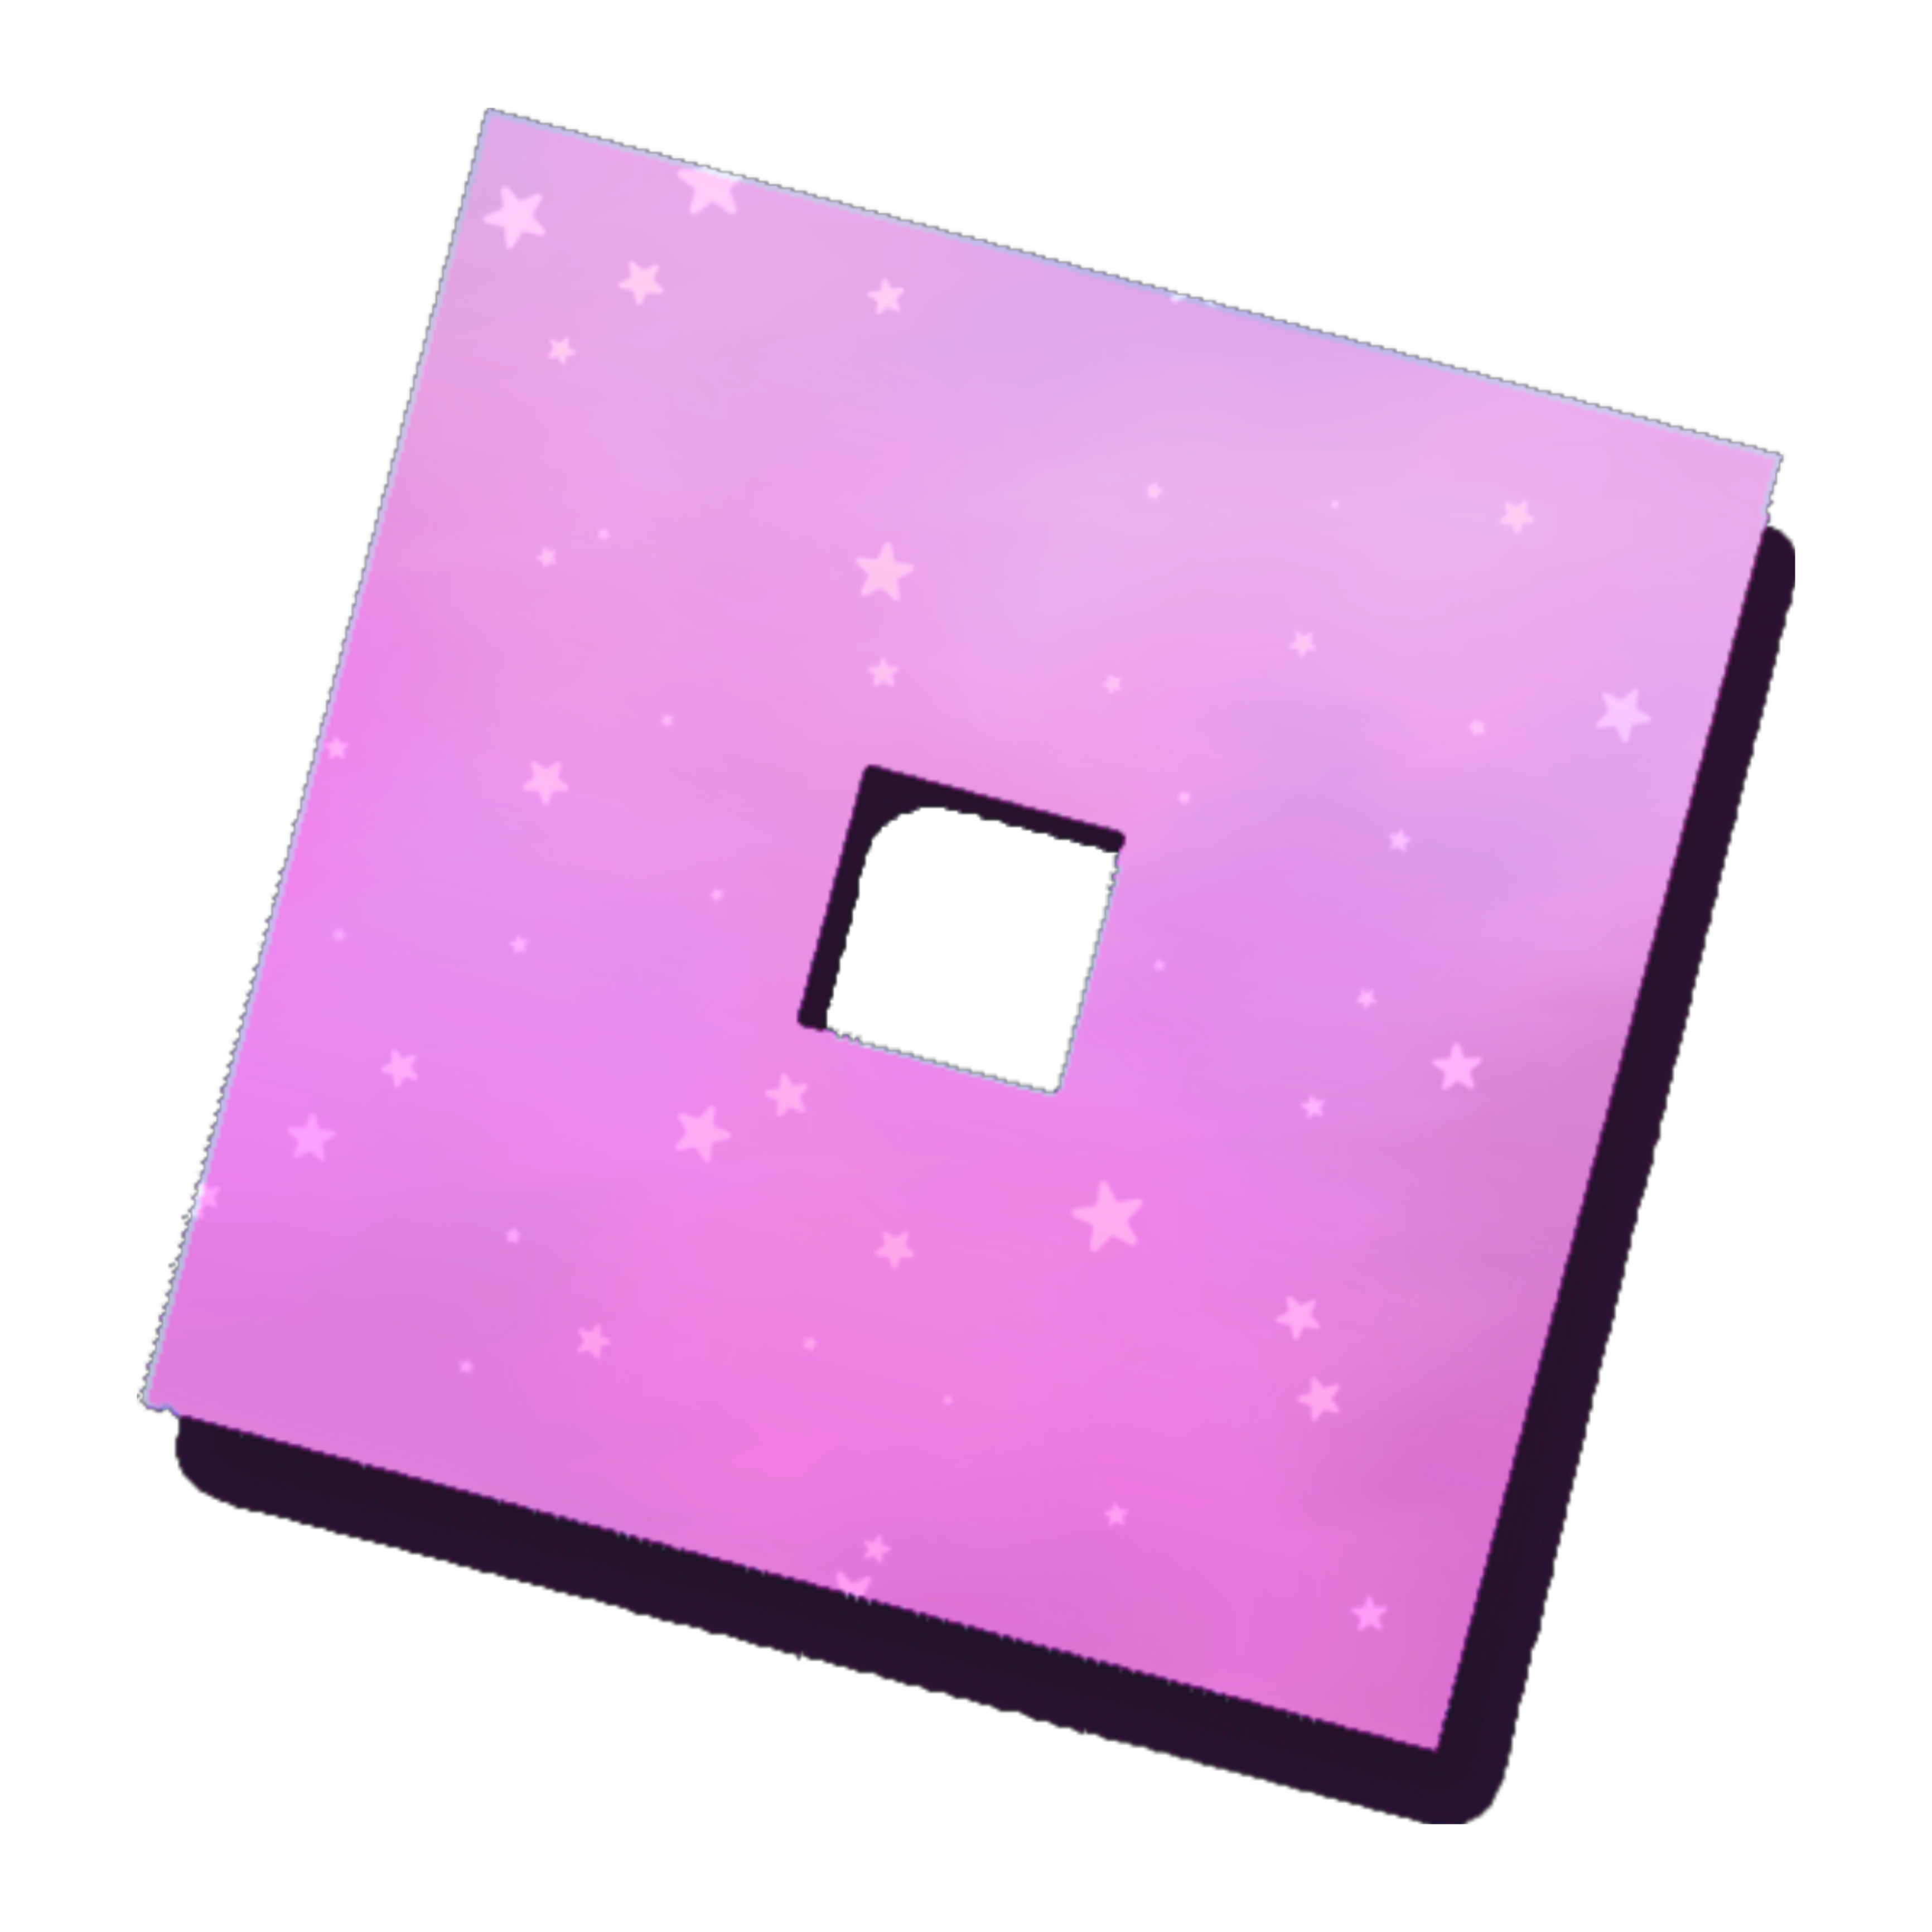 roblox logo in pink